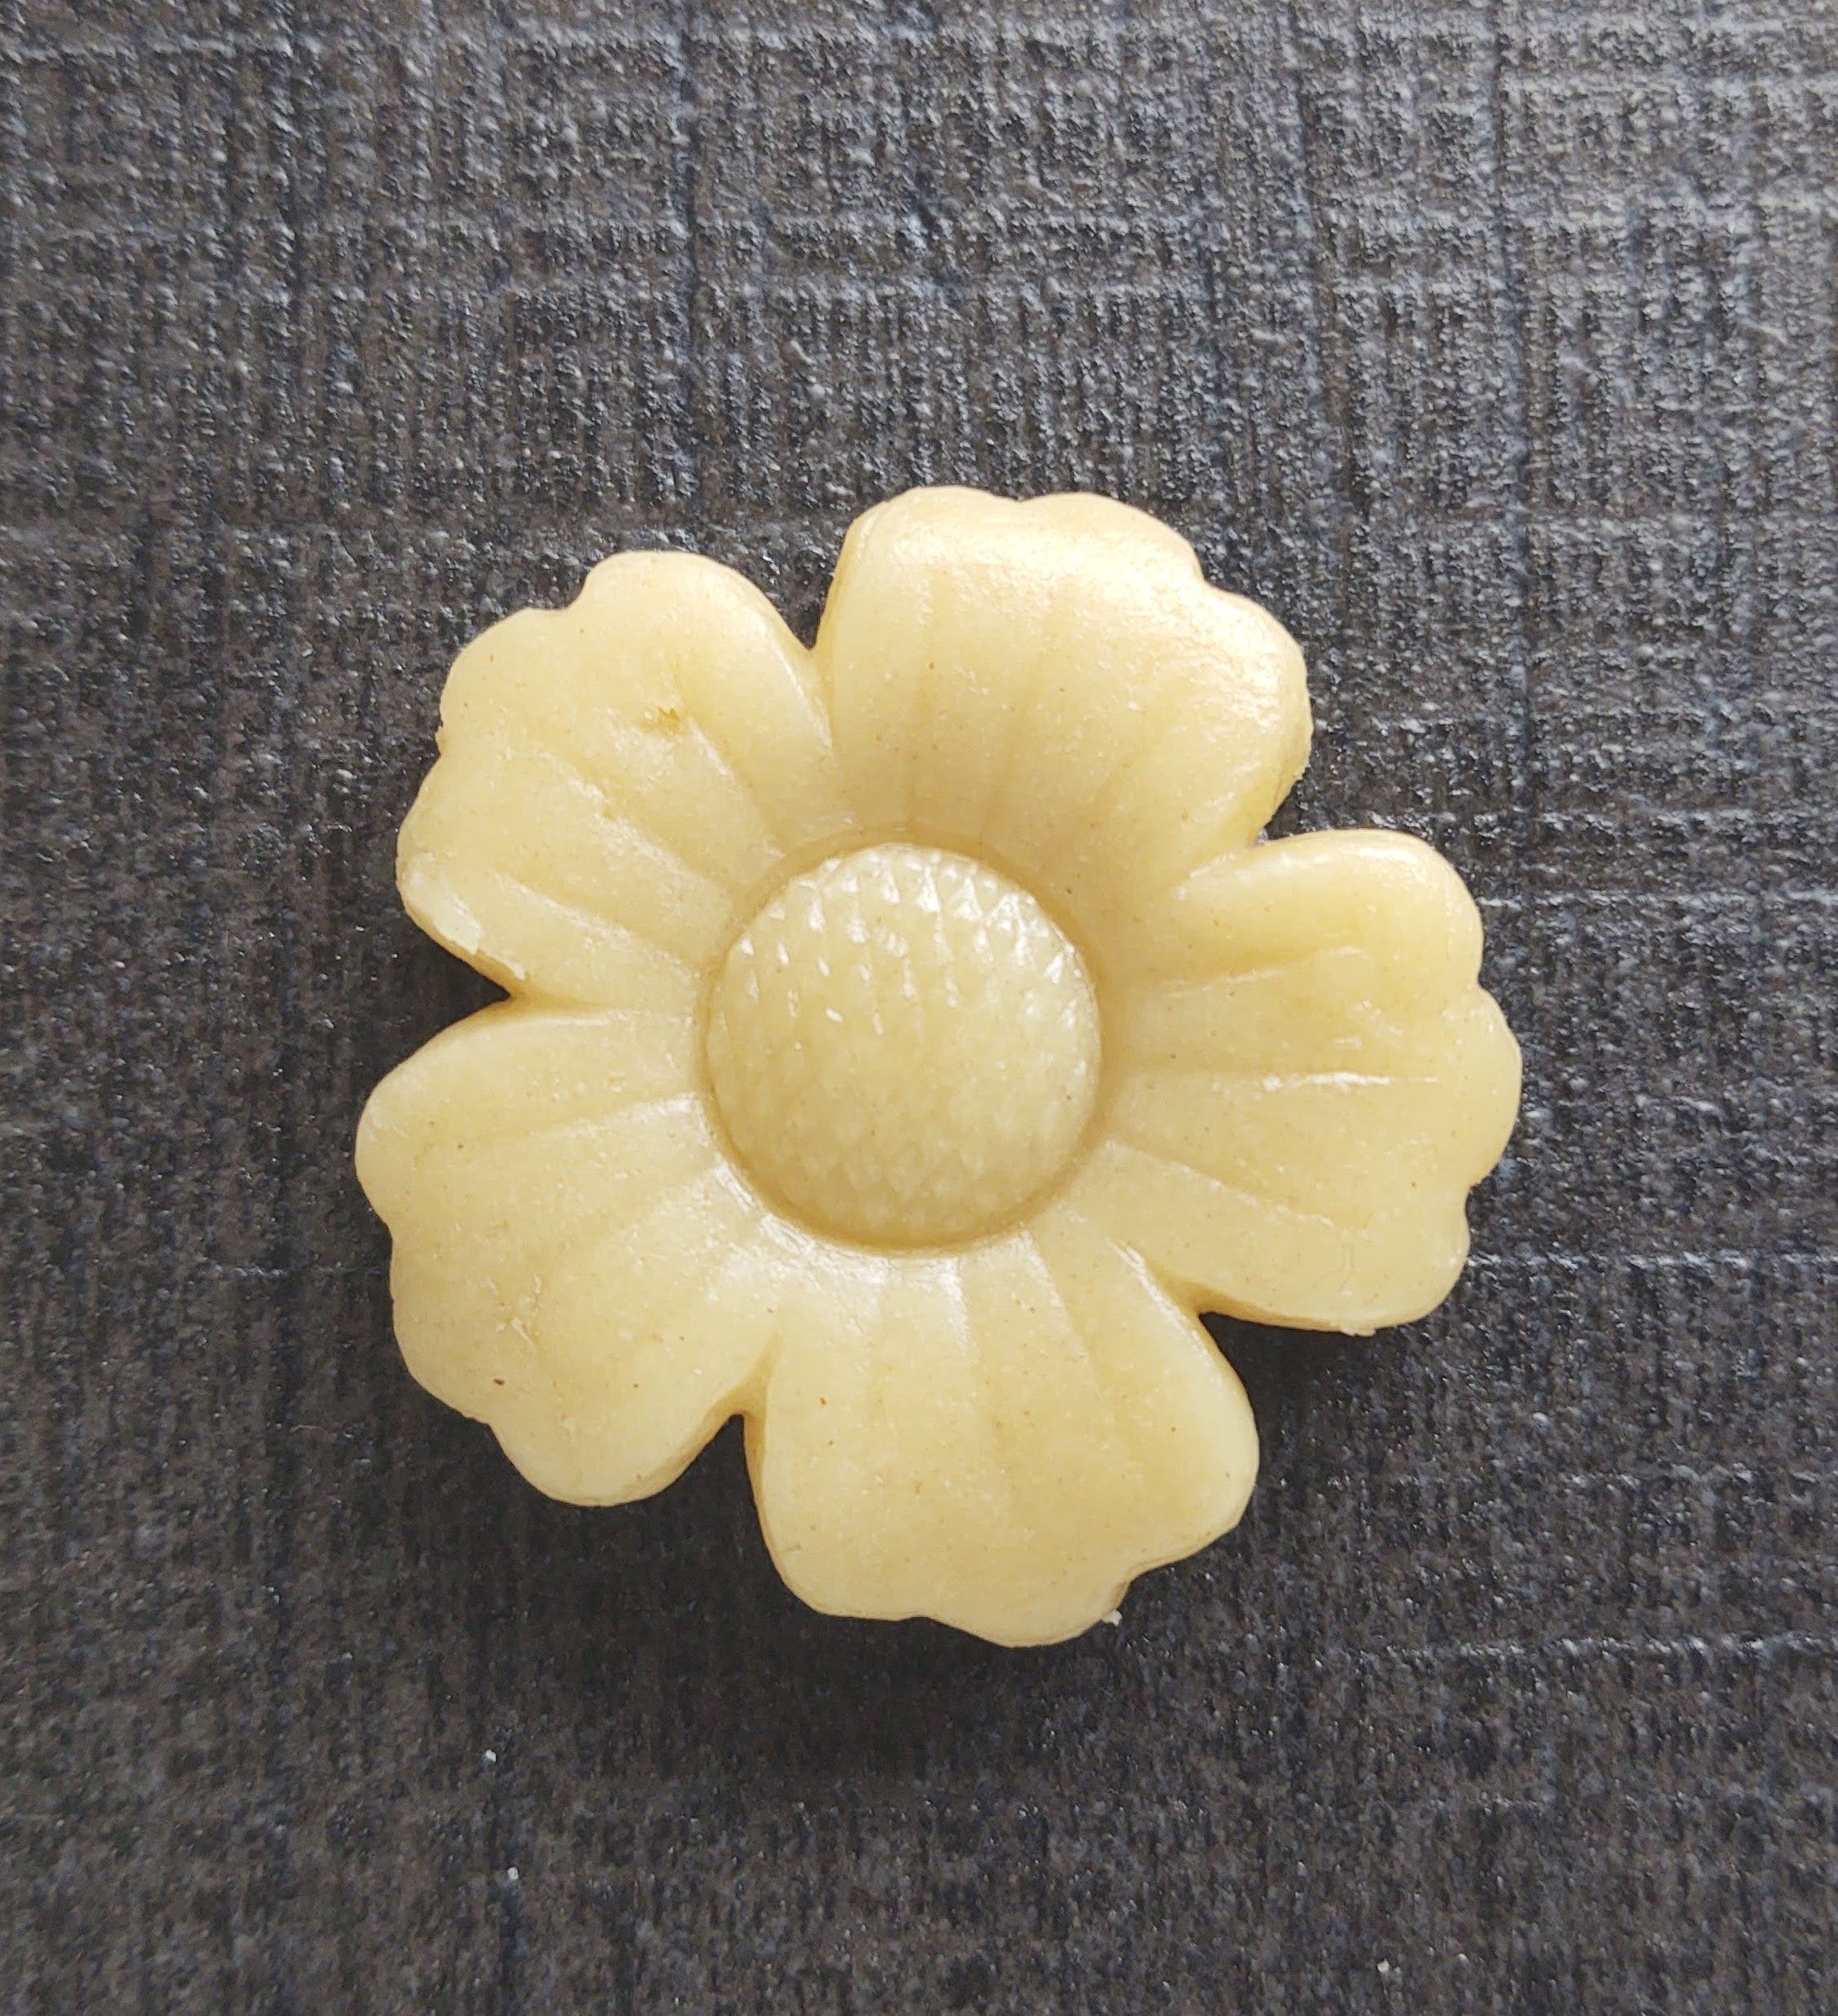 Mini Plum Blossom Silicone Mold (15 Cavity), 3D Small Flower Mold, T, MiniatureSweet, Kawaii Resin Crafts, Decoden Cabochons Supplies